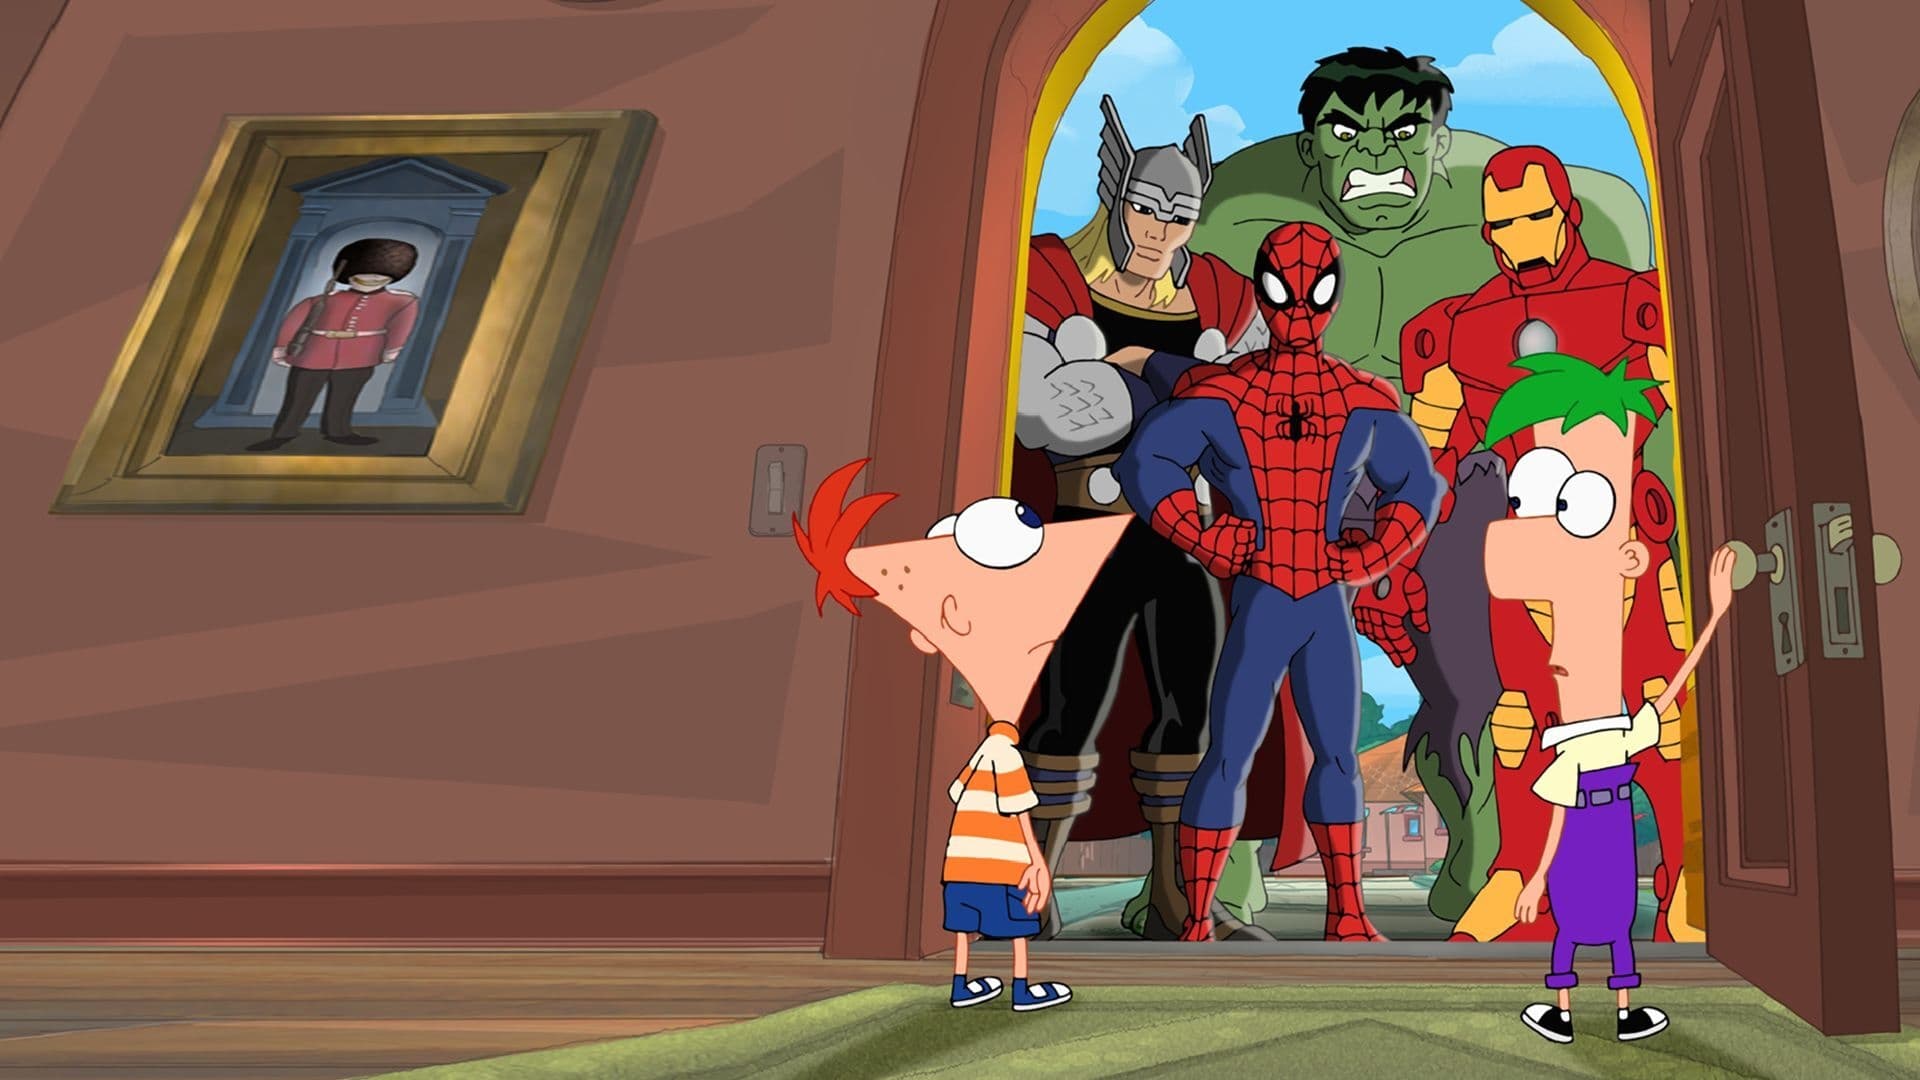 Phineas and ferb: mission marvel - Phineas and ferb: mission marvel